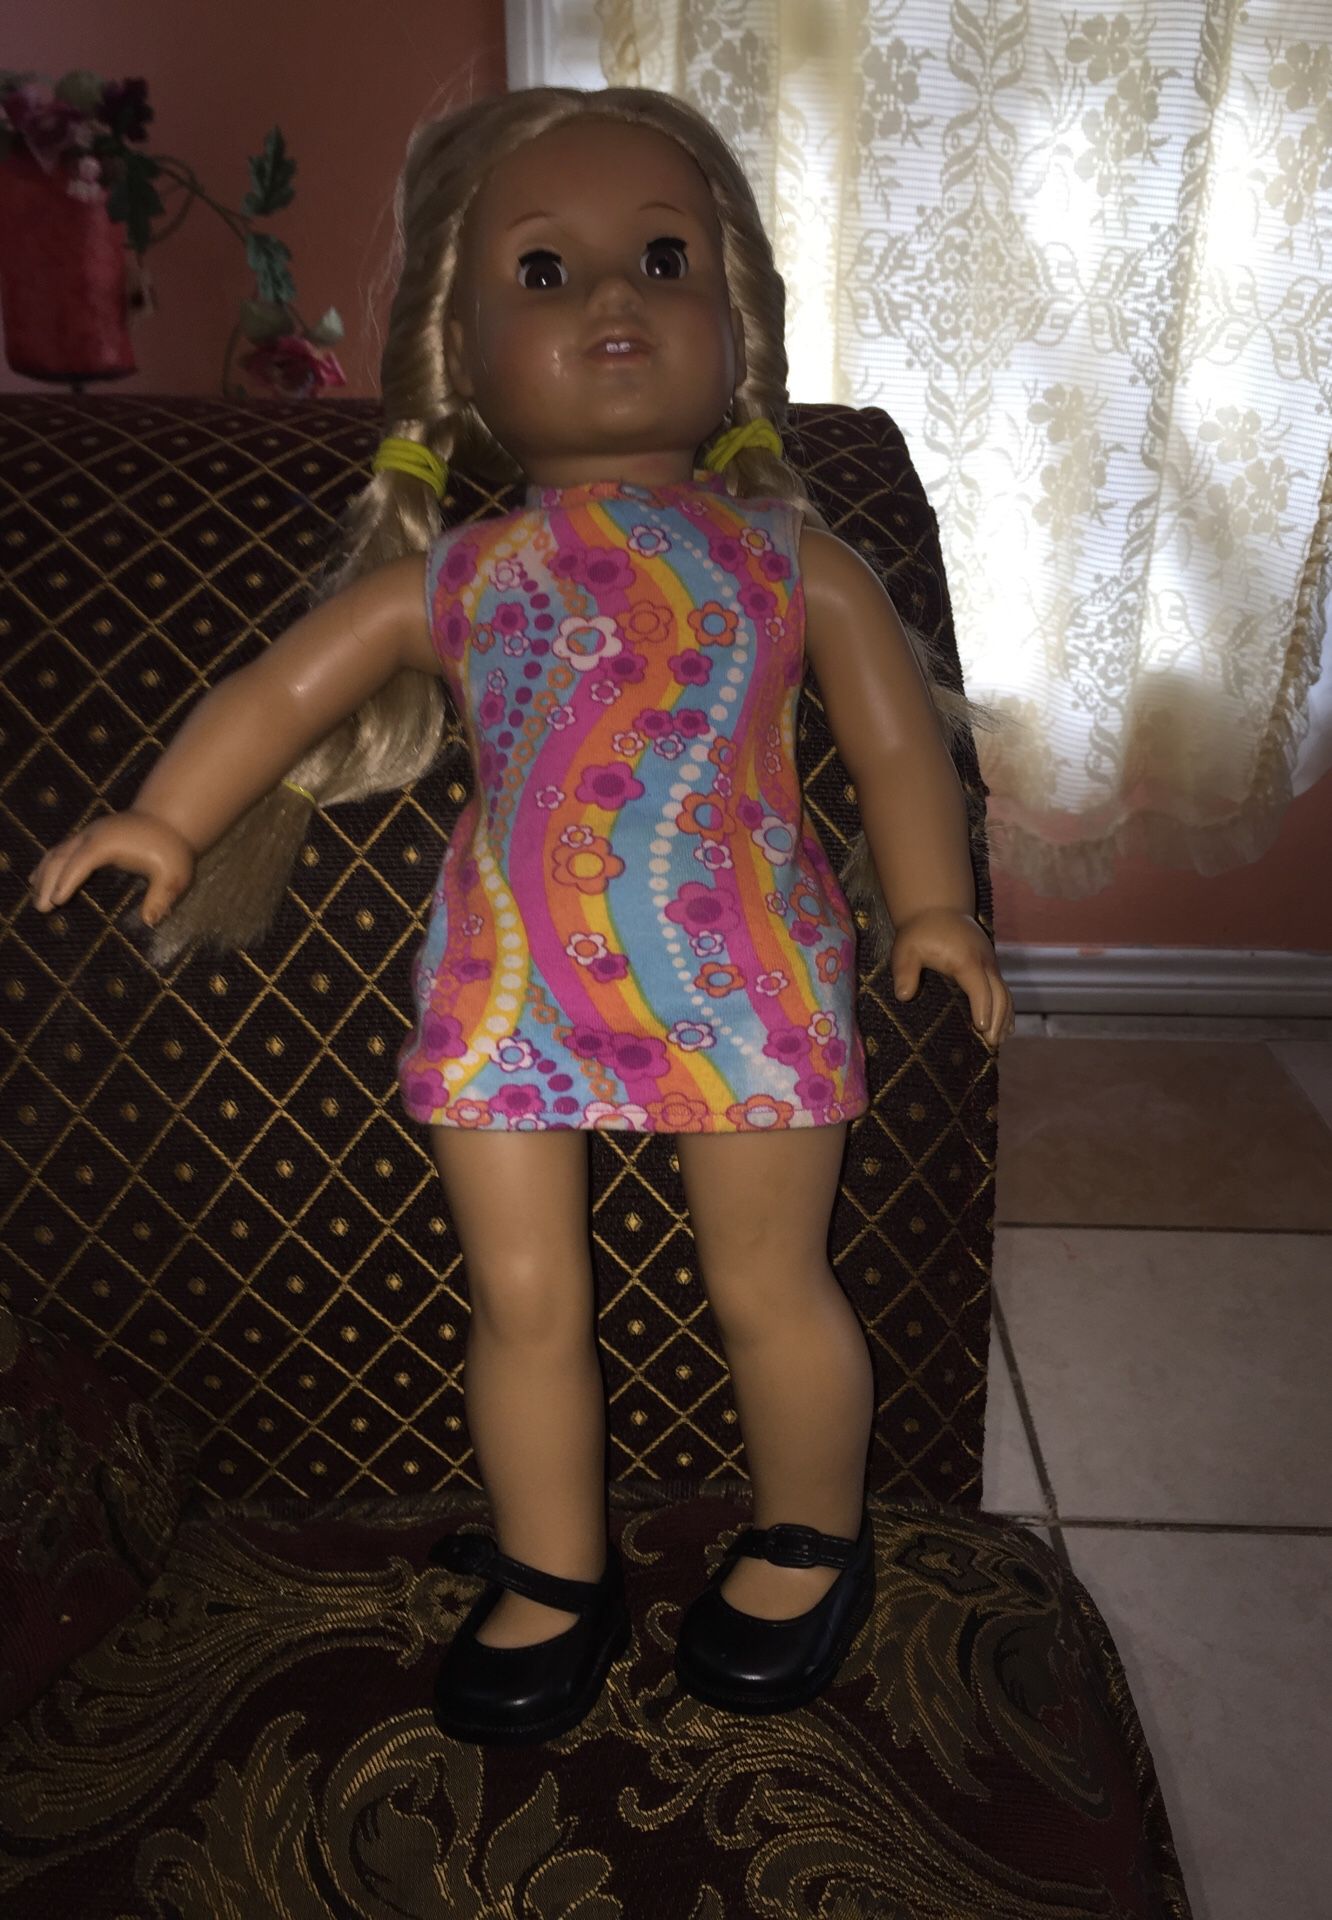 American girl doll for sale $40